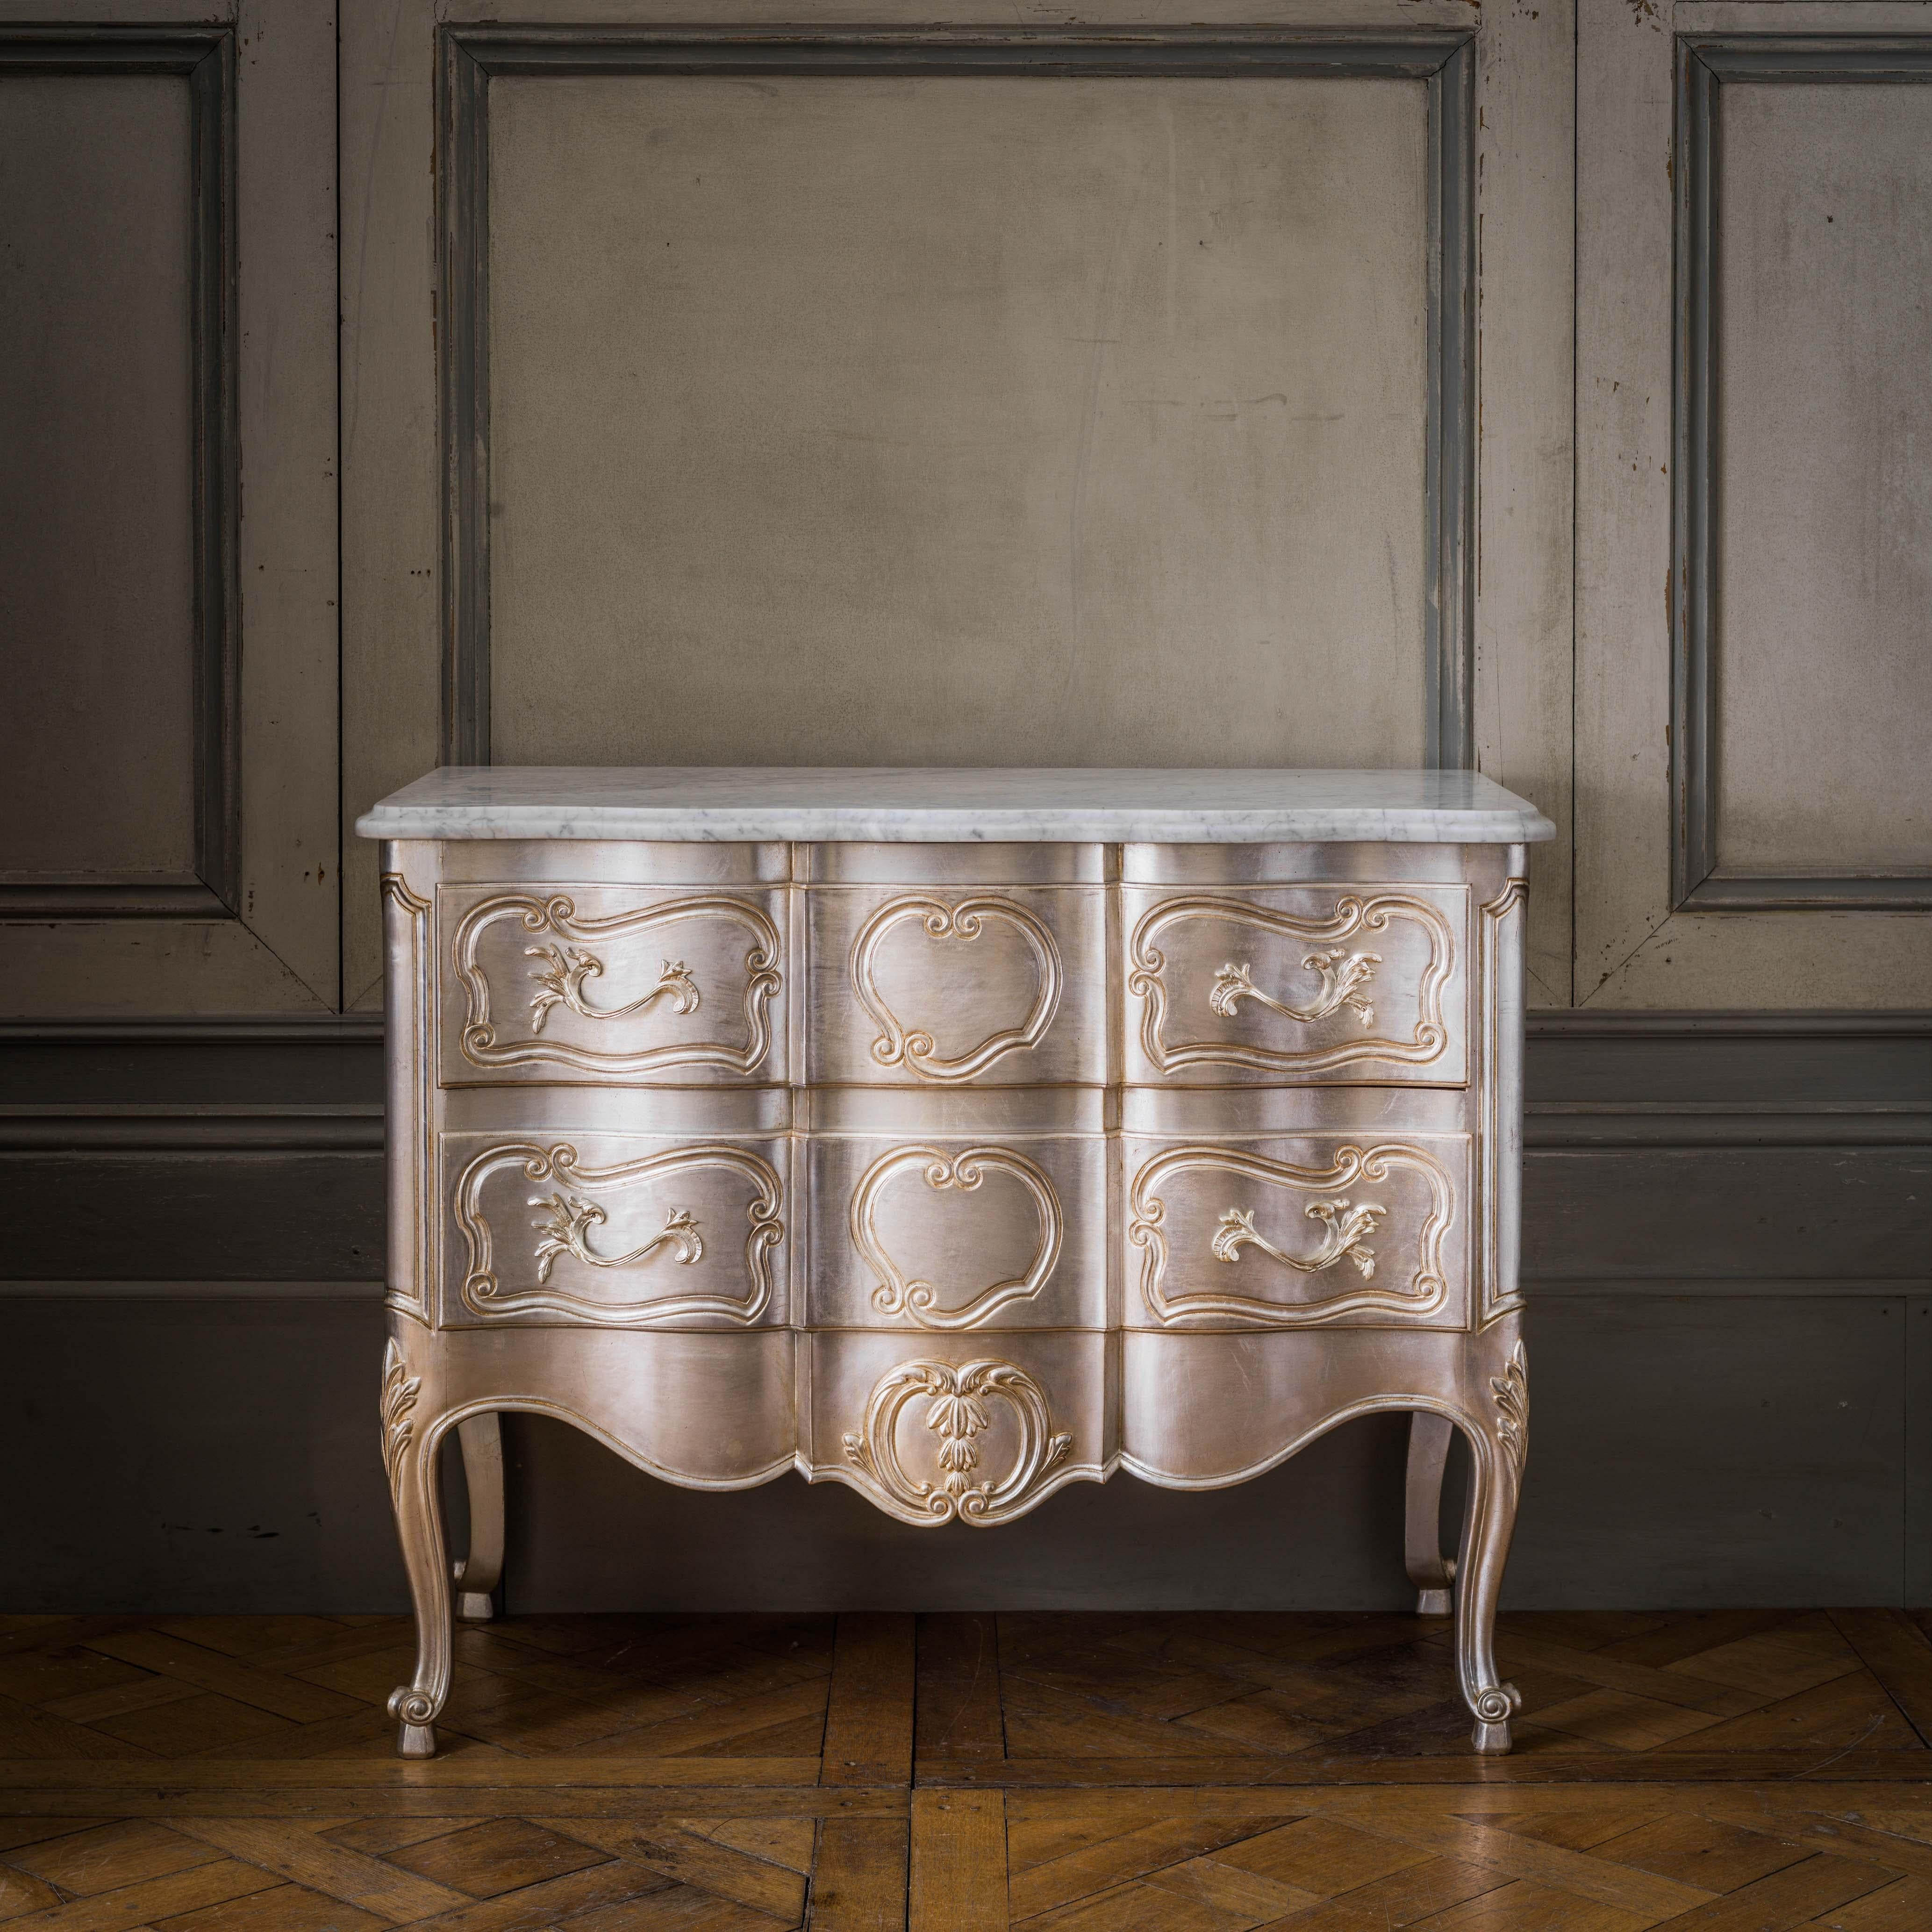 A LXV style chest of drawers, hand carved to order and custom finished. The picture shows the piece in a hand gilded silver finish with a beveled white Carrara marble top.